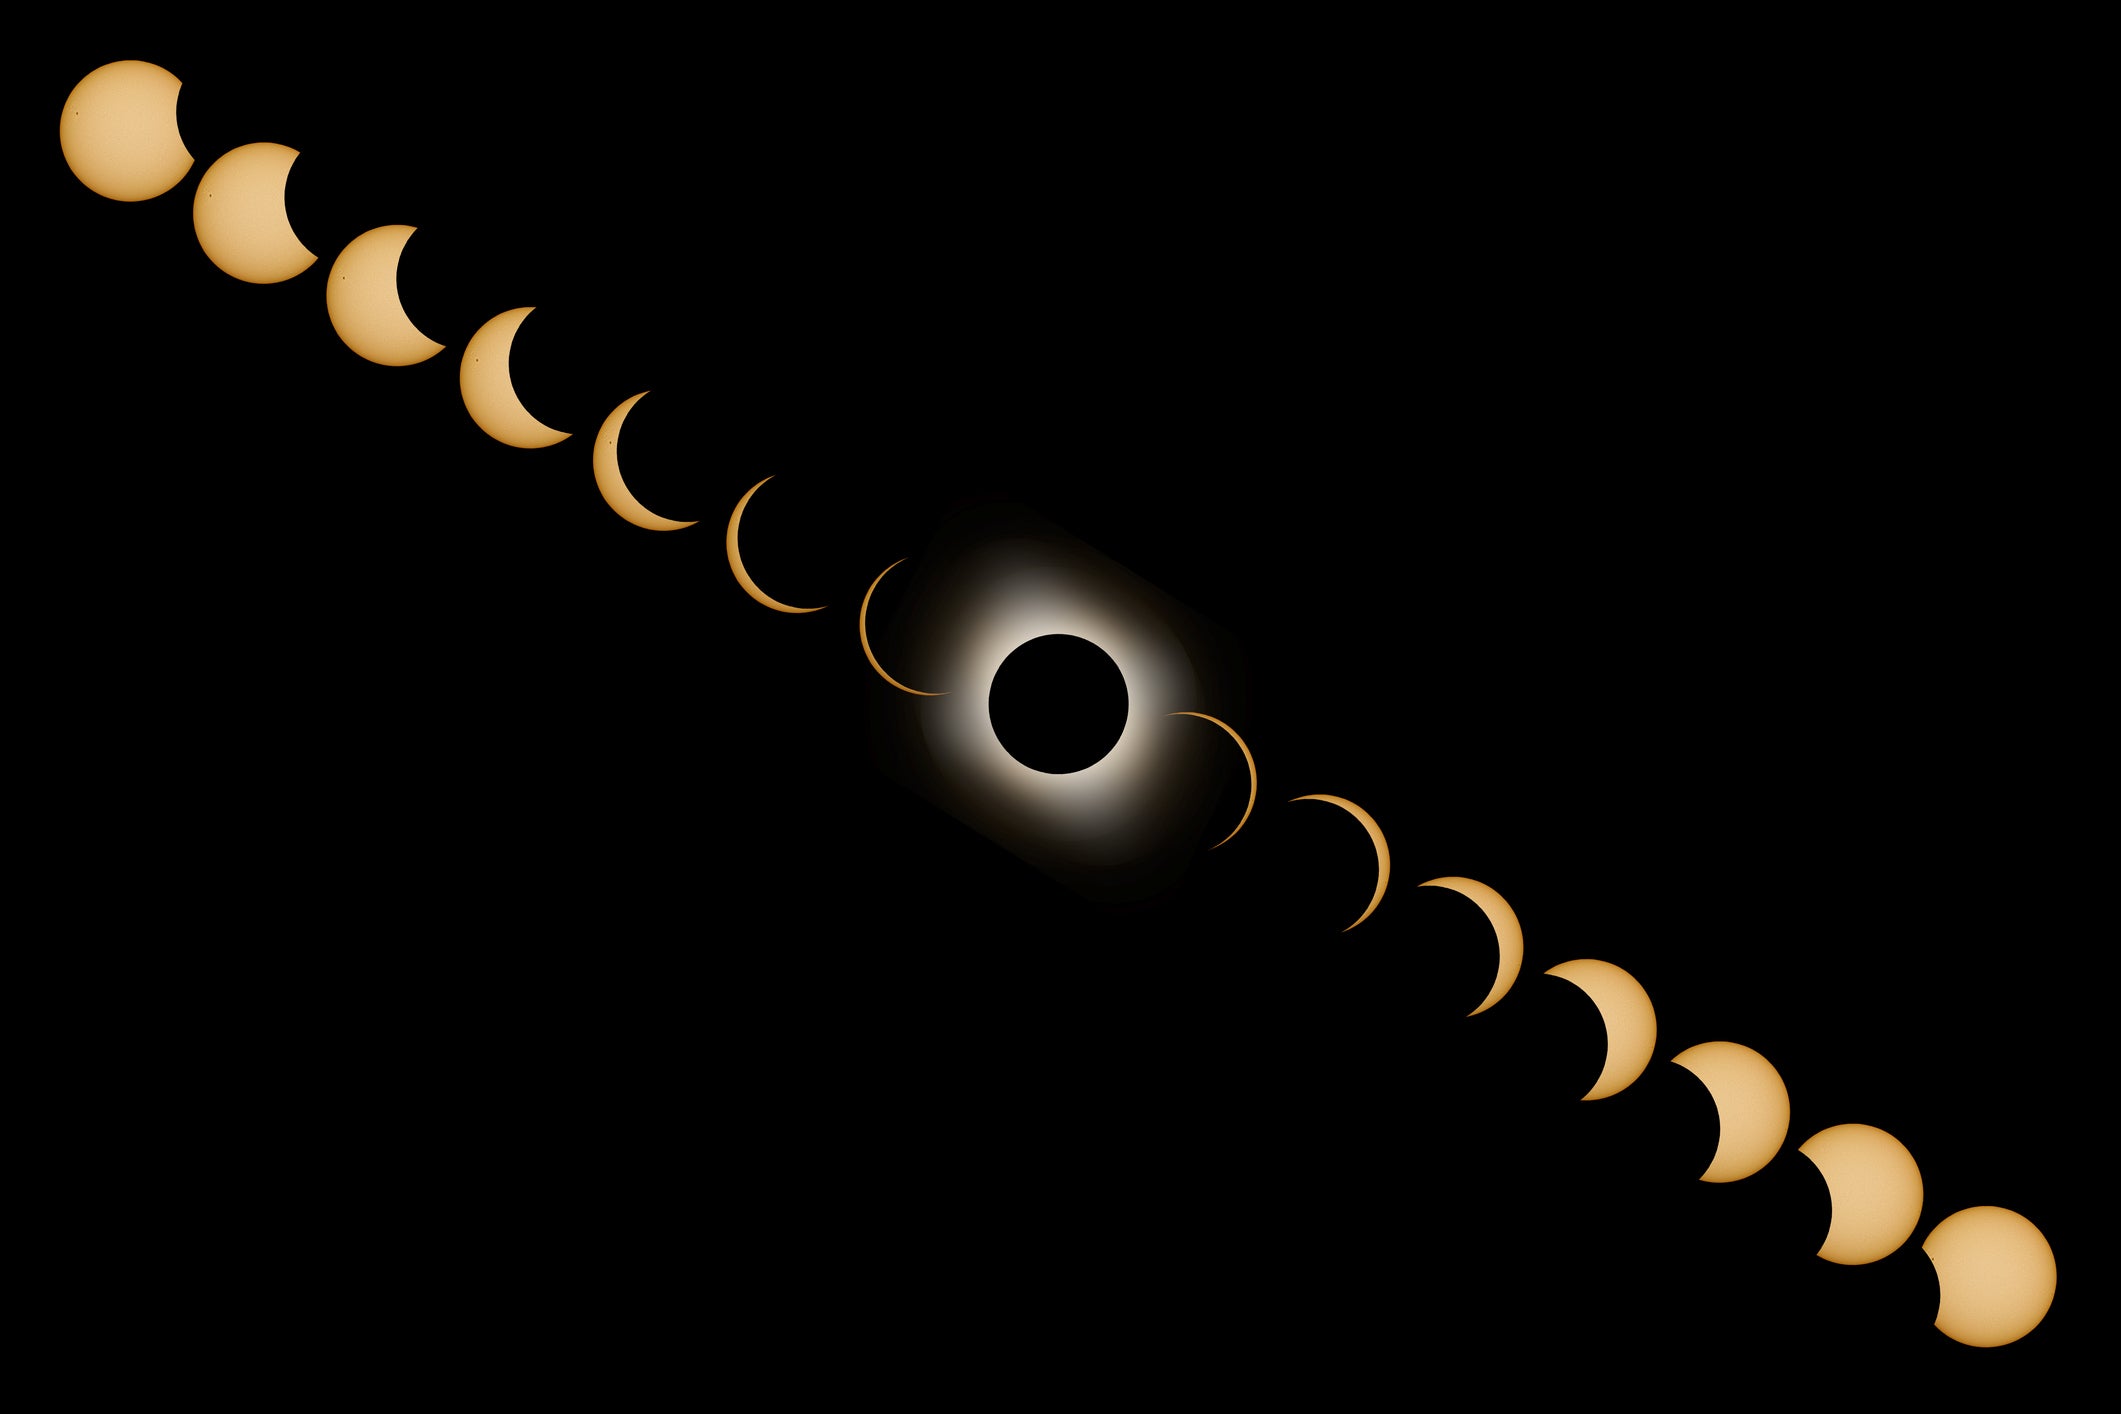 The cycle of a solar eclipse.